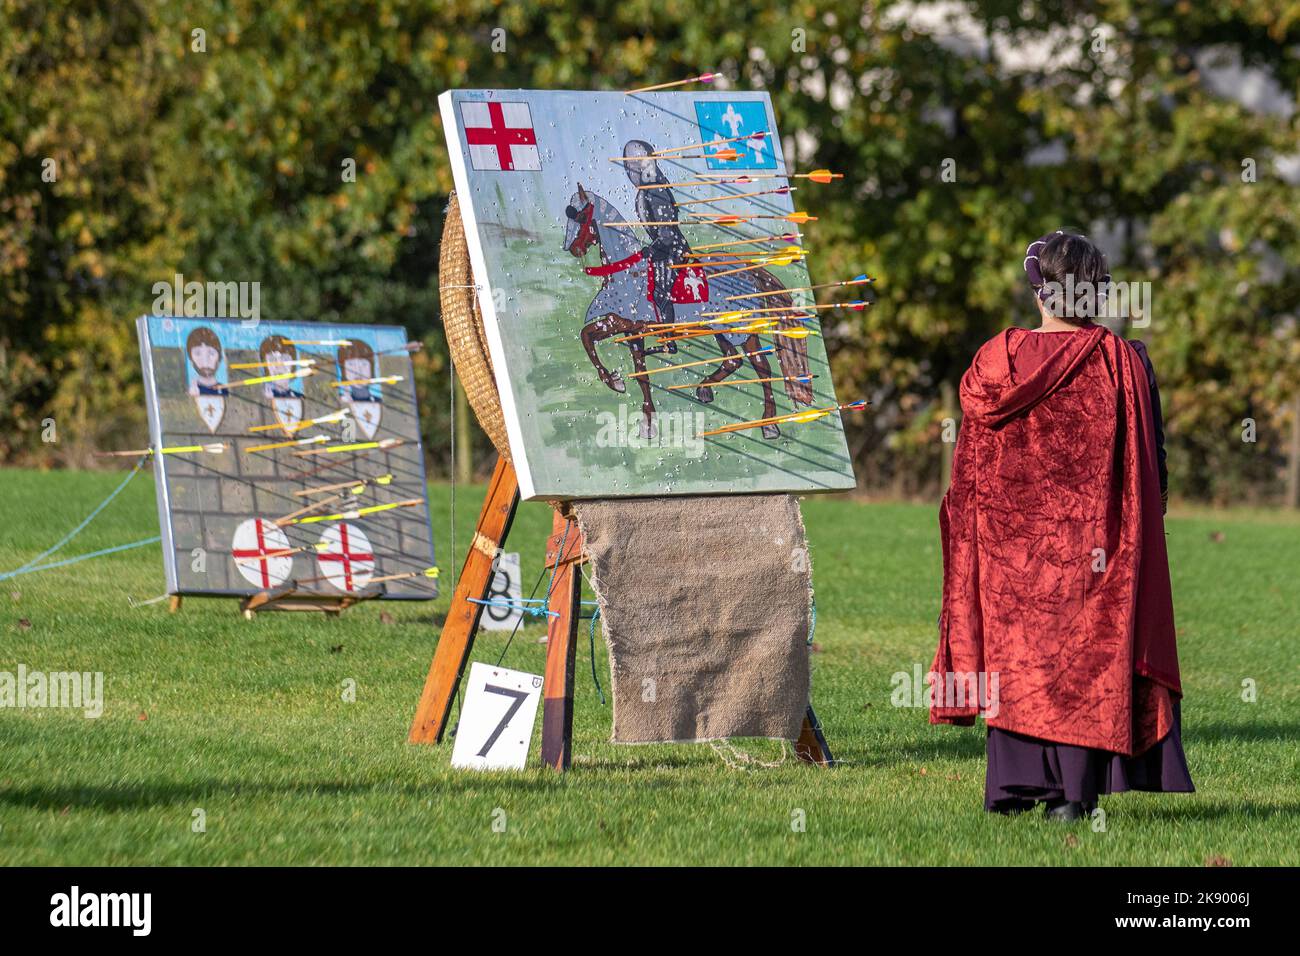 SAMLESBURY LONGBOW ARCHERS THE BATTLE OF AGINCOURT - 1415 reenactment. Traditional long bow archery shoot on of the battle anniversary in medieval dress, British Long-Bow Society (BLBS) event. Credit; MediaWorldImages/AlamyLiveNews Stock Photo